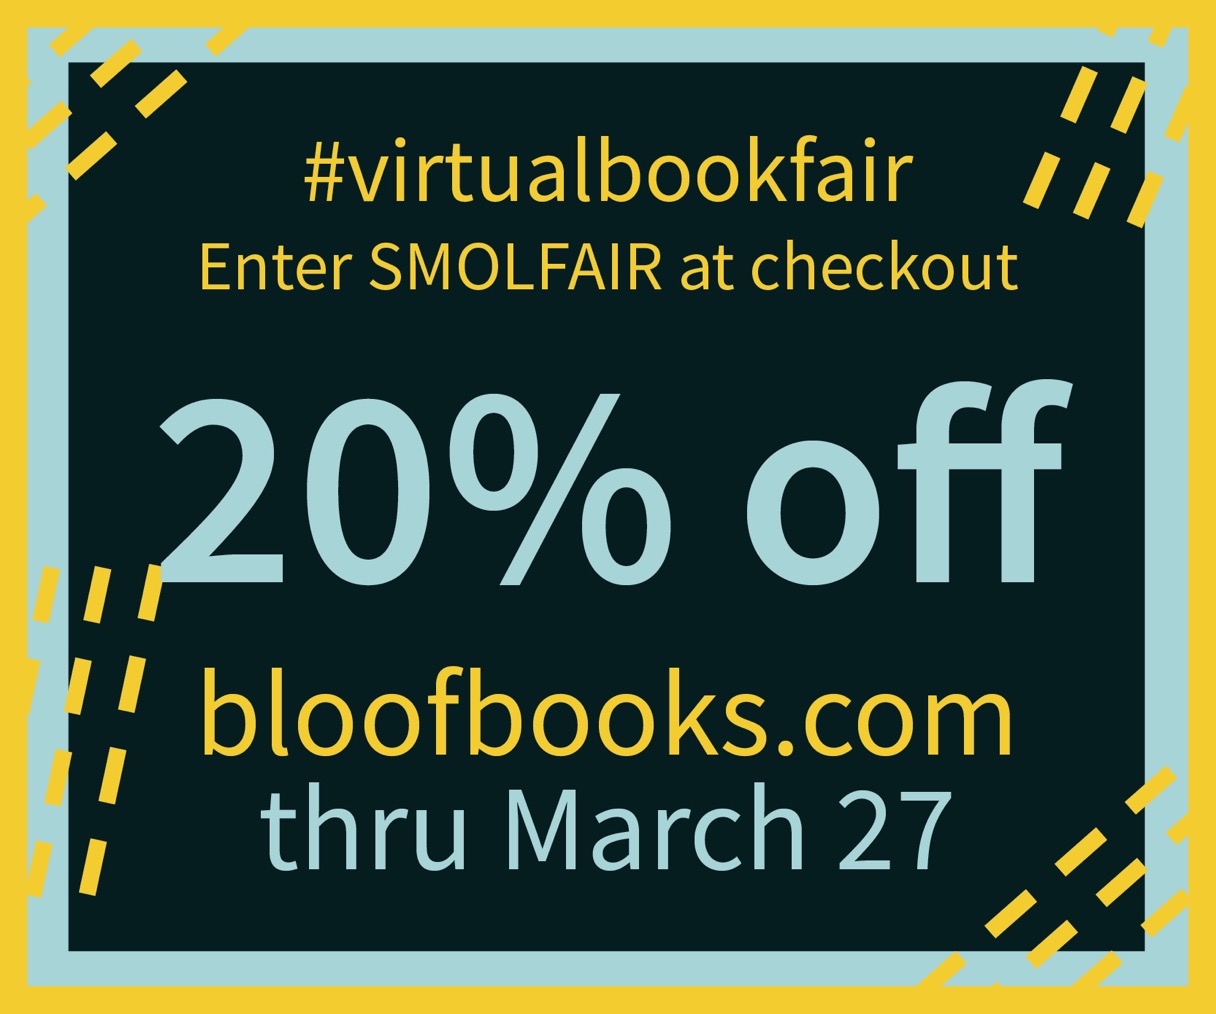 A black graphic with yellow and aqua borders and accents. The yellow and aqua text outlines the virtual bookfair discount: Enter SMOLFAIR at checkout for 20% off bloofbooks.com through March 27.